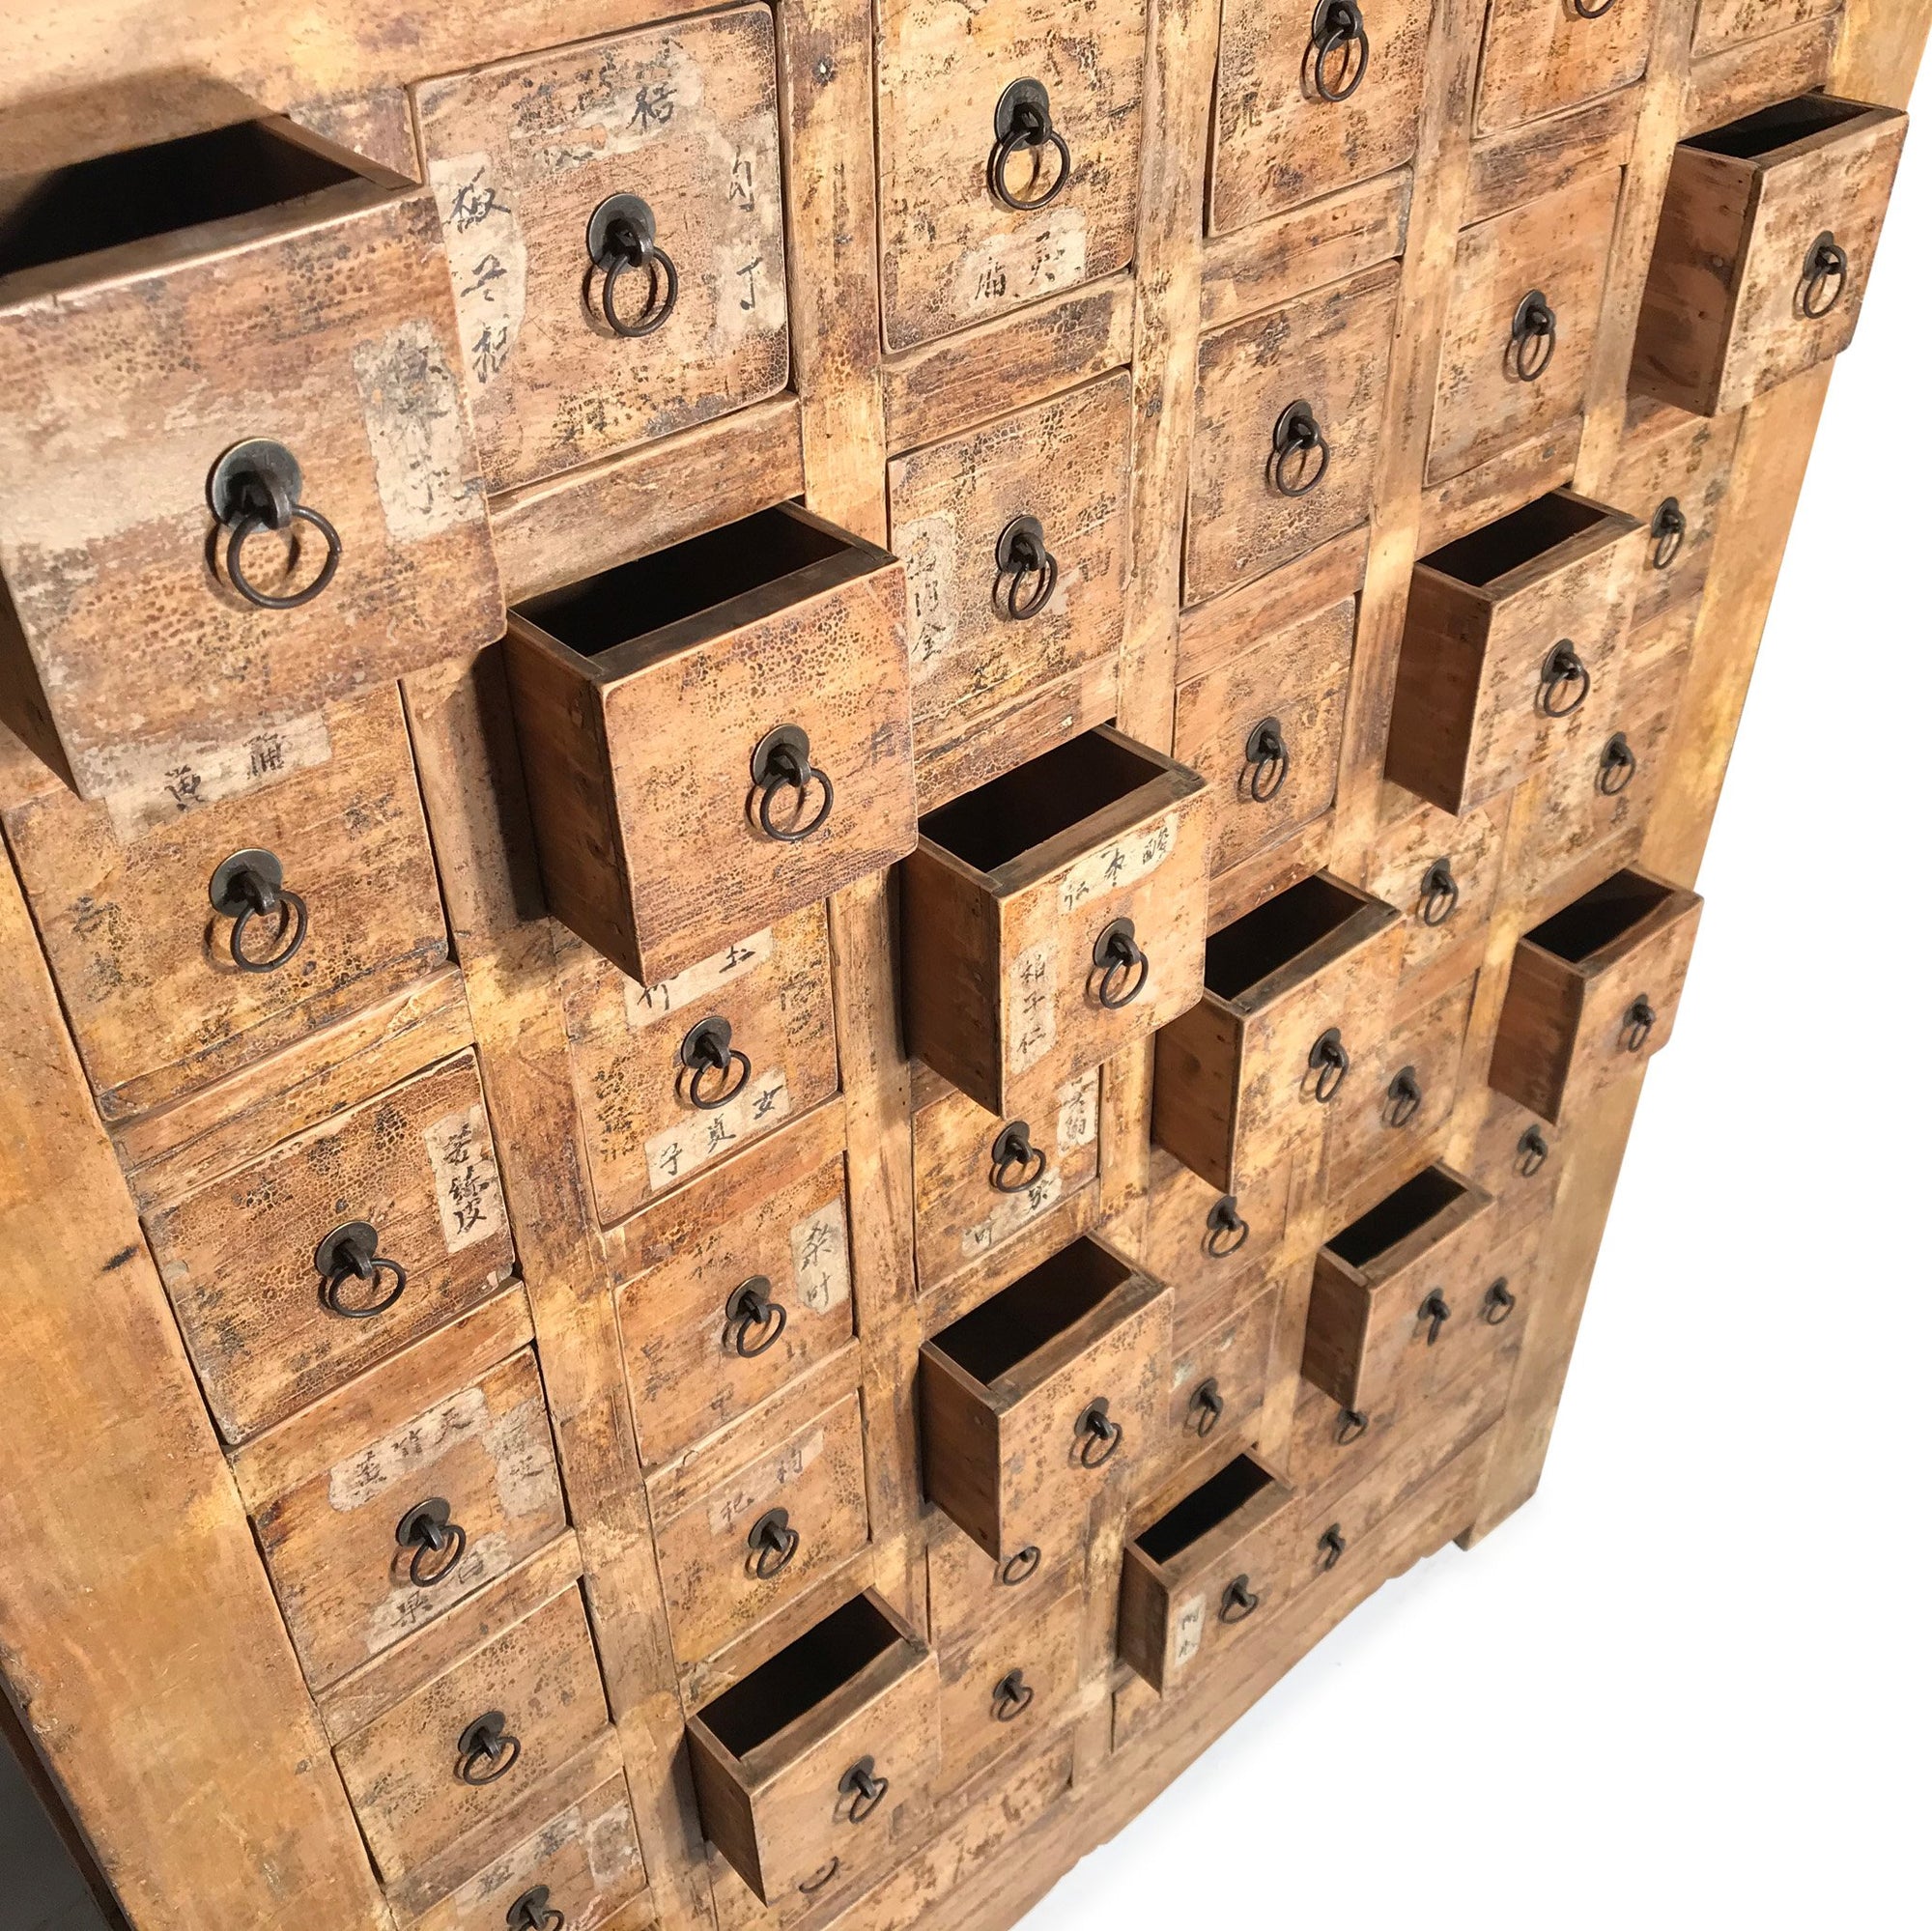 Apothecary Chest From Hebei Province - 19thC - 108 x 43 x 145 (wxdxh cms) - C1565